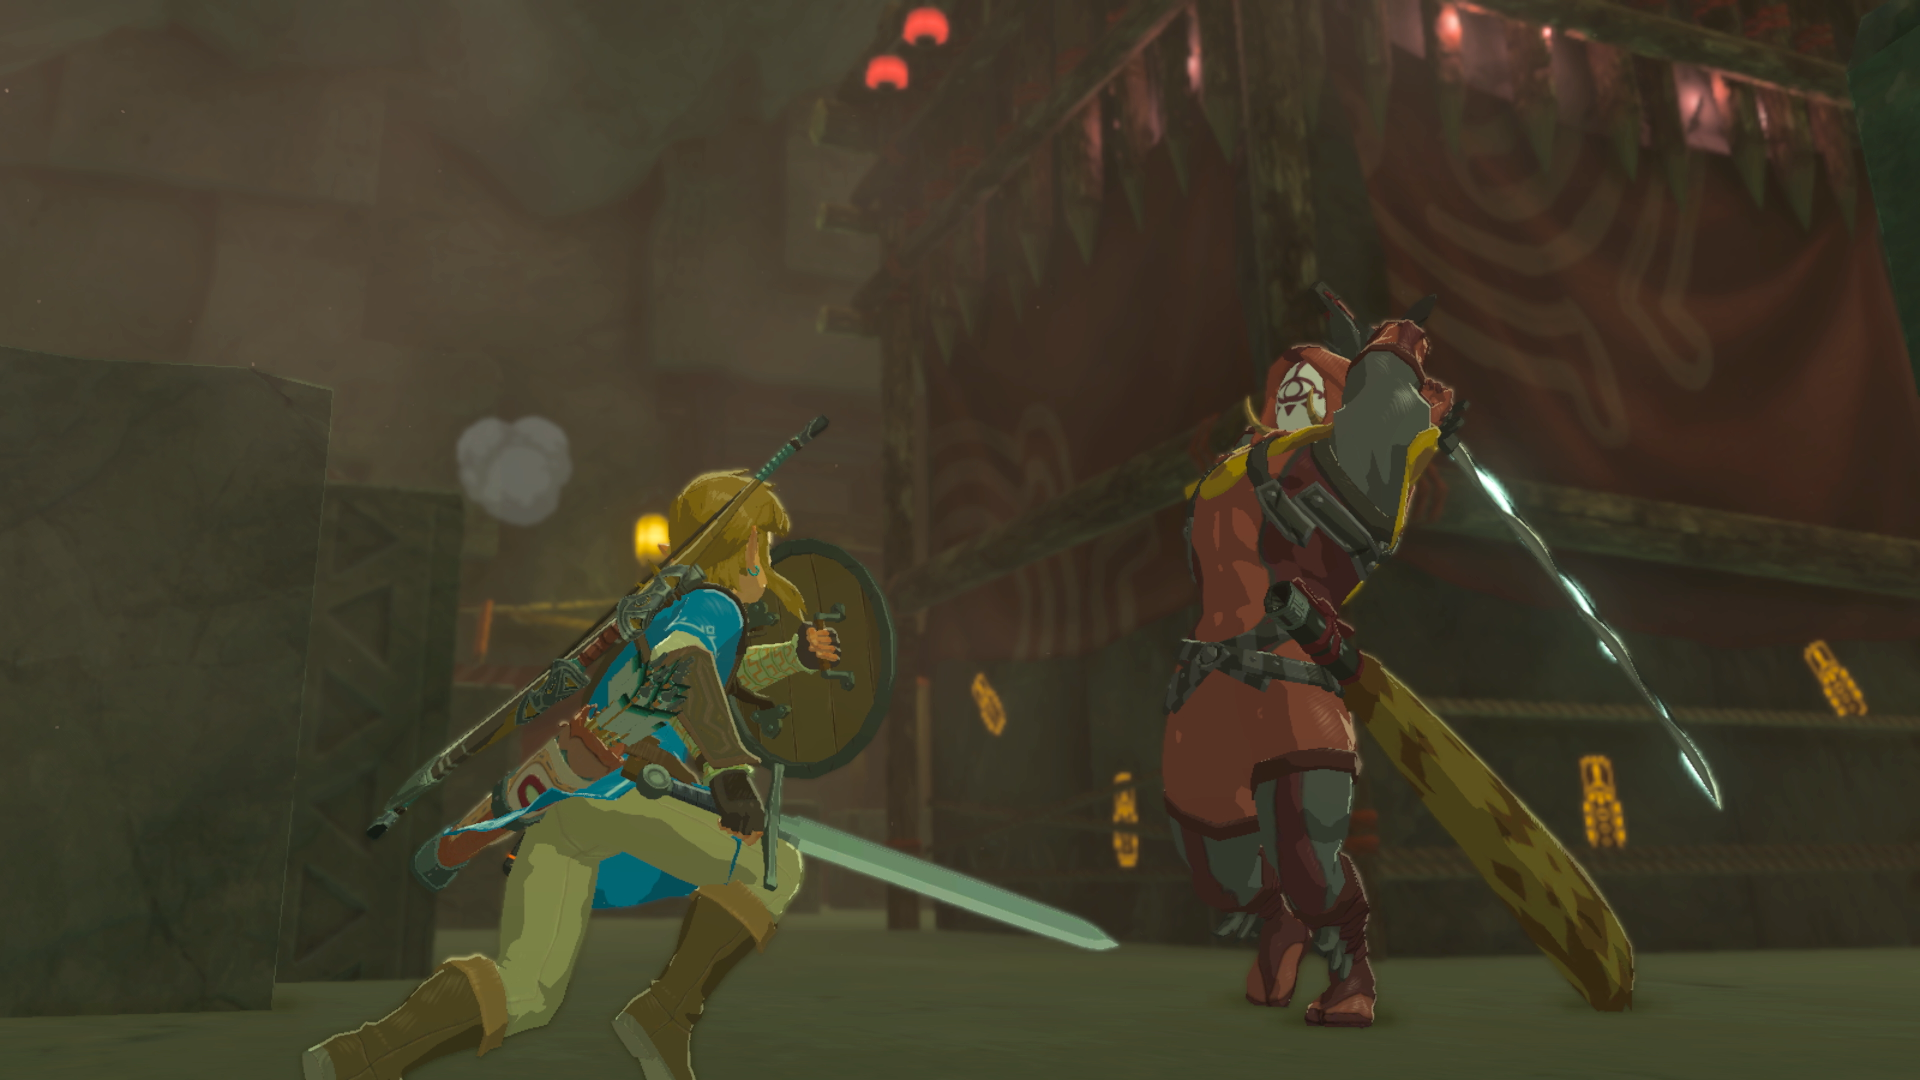 The Legend of Zelda: Breath of the Wild Guide: Tips on Weapons